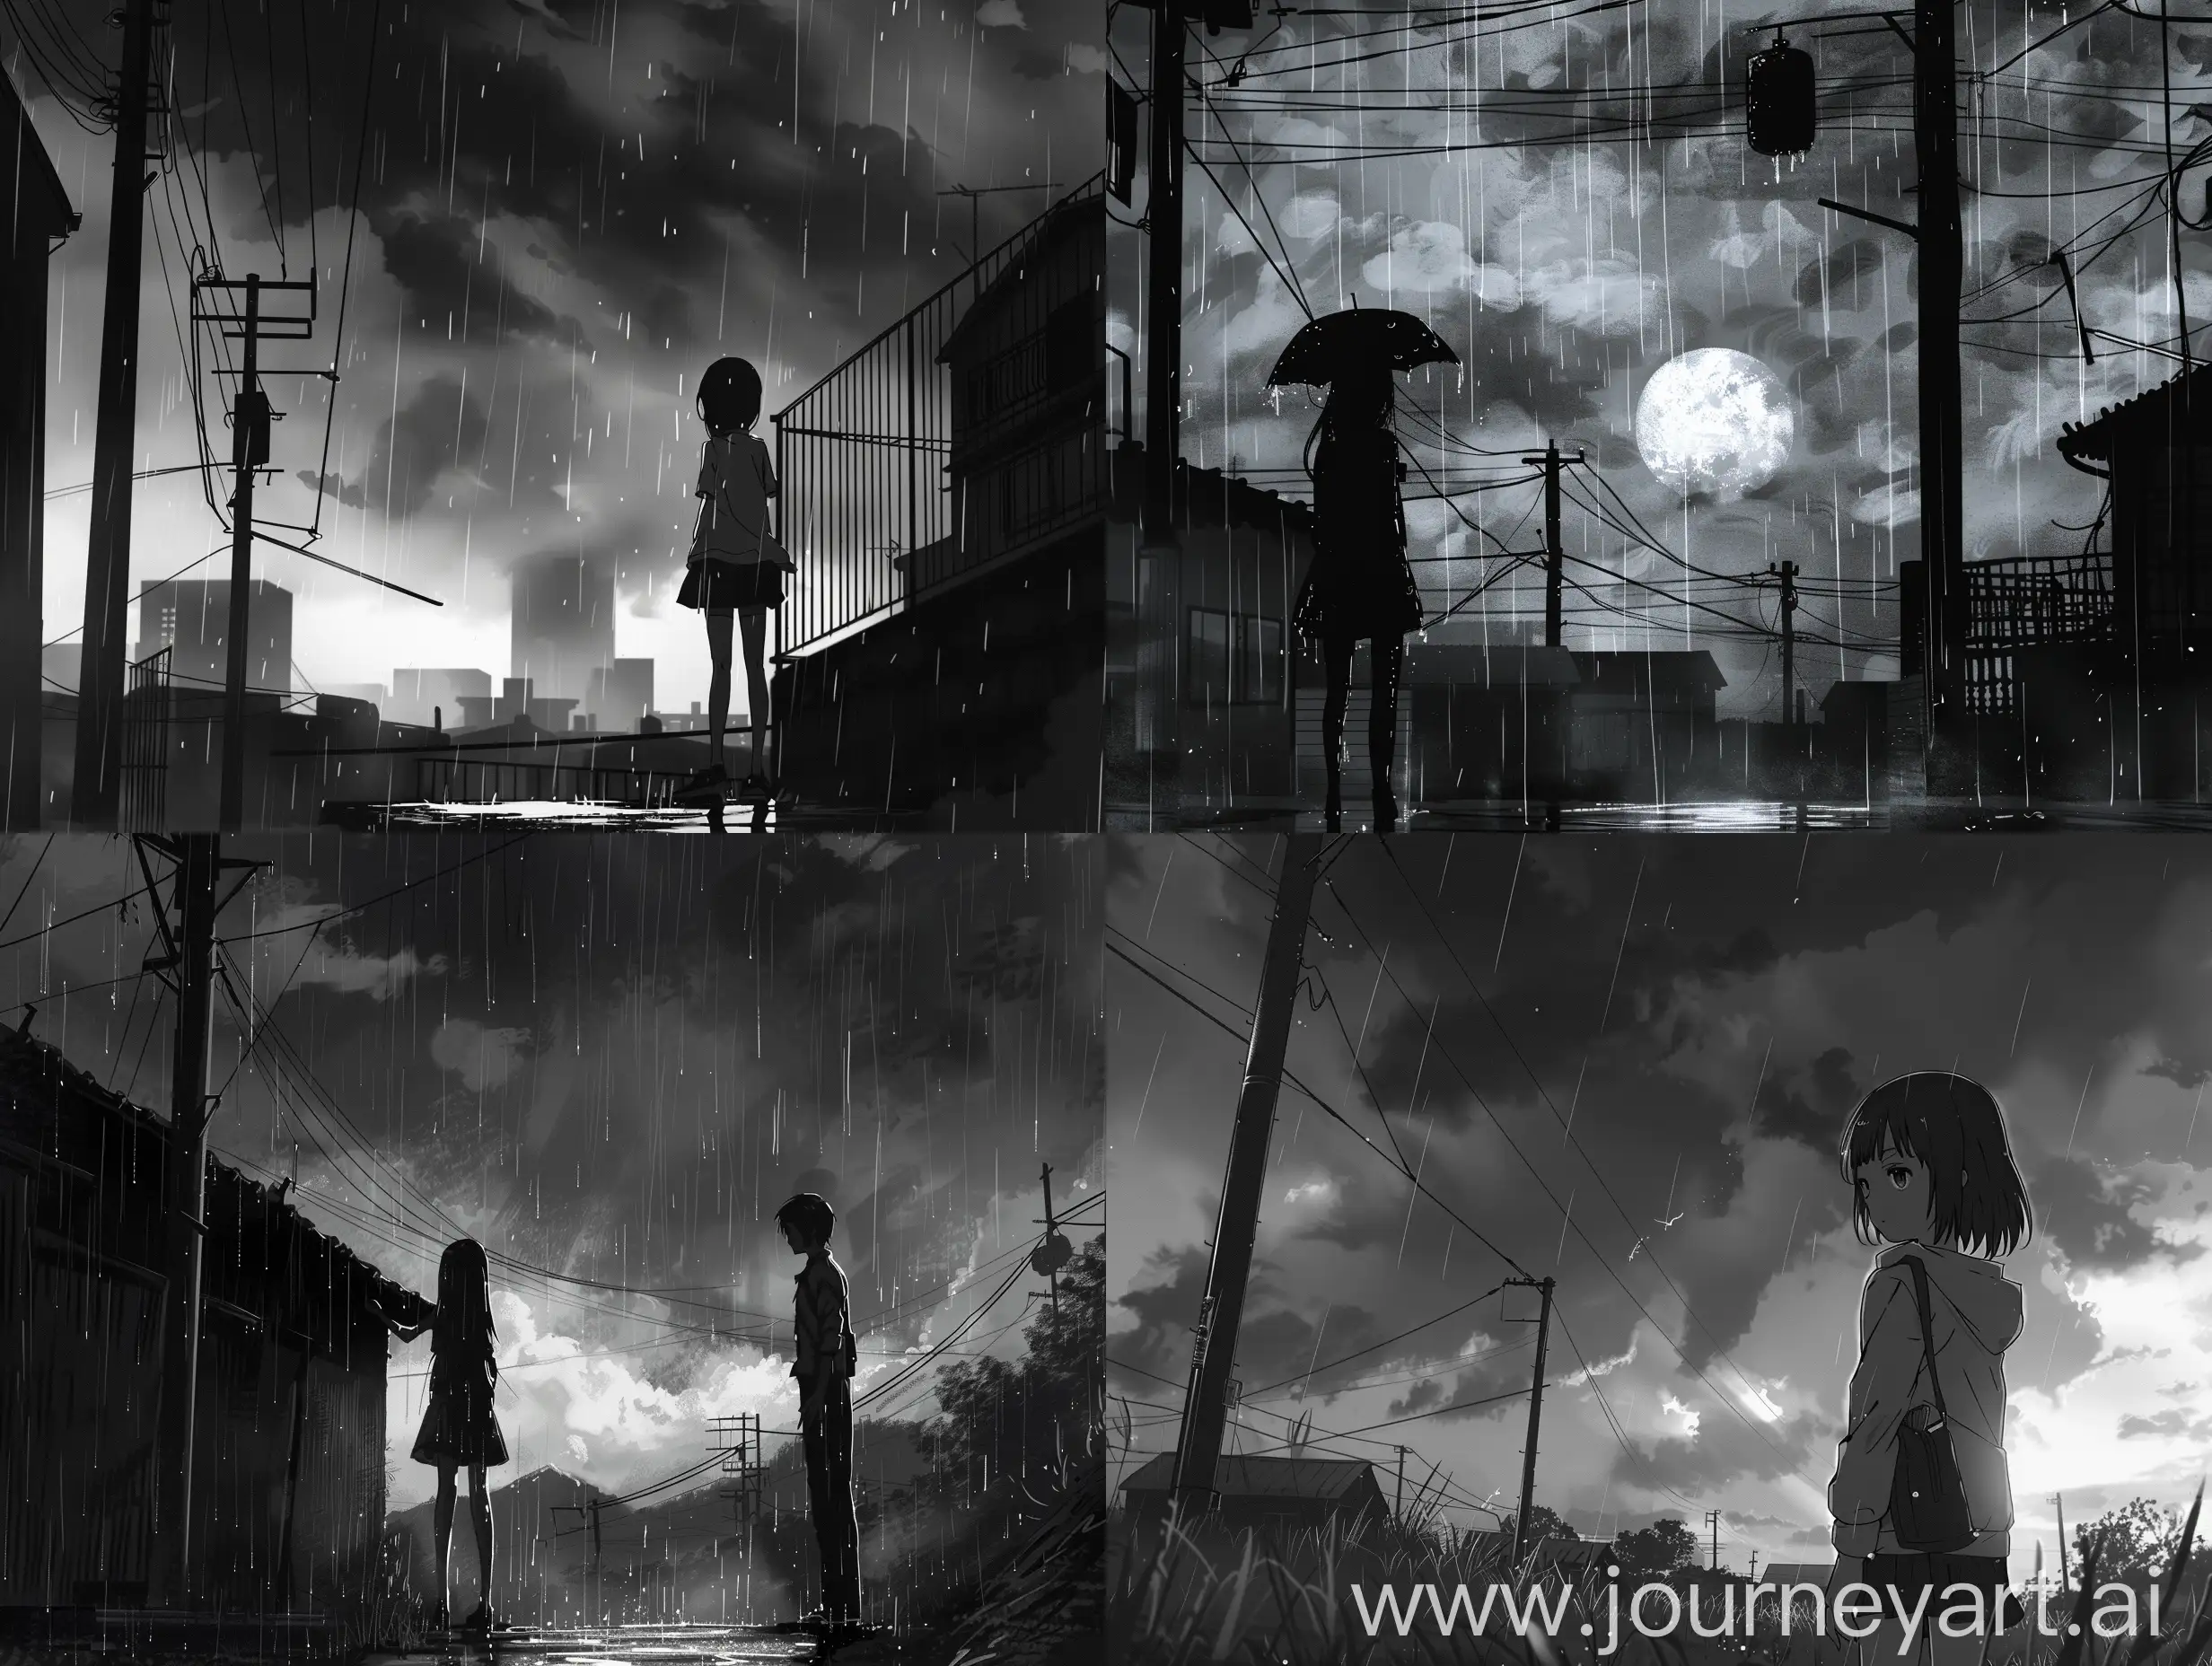 Anime style, a scene of parting with a girl, loneliness, a gloomy atmosphere, in grayscale tones. The setting is melancholic and emotional, with a sense of loss and sorrow. The background should be dark and somber, possibly featuring rain or a cloudy sky, to enhance the mood. The characters should express deep sadness, with the girl walking away and the protagonist looking forlorn